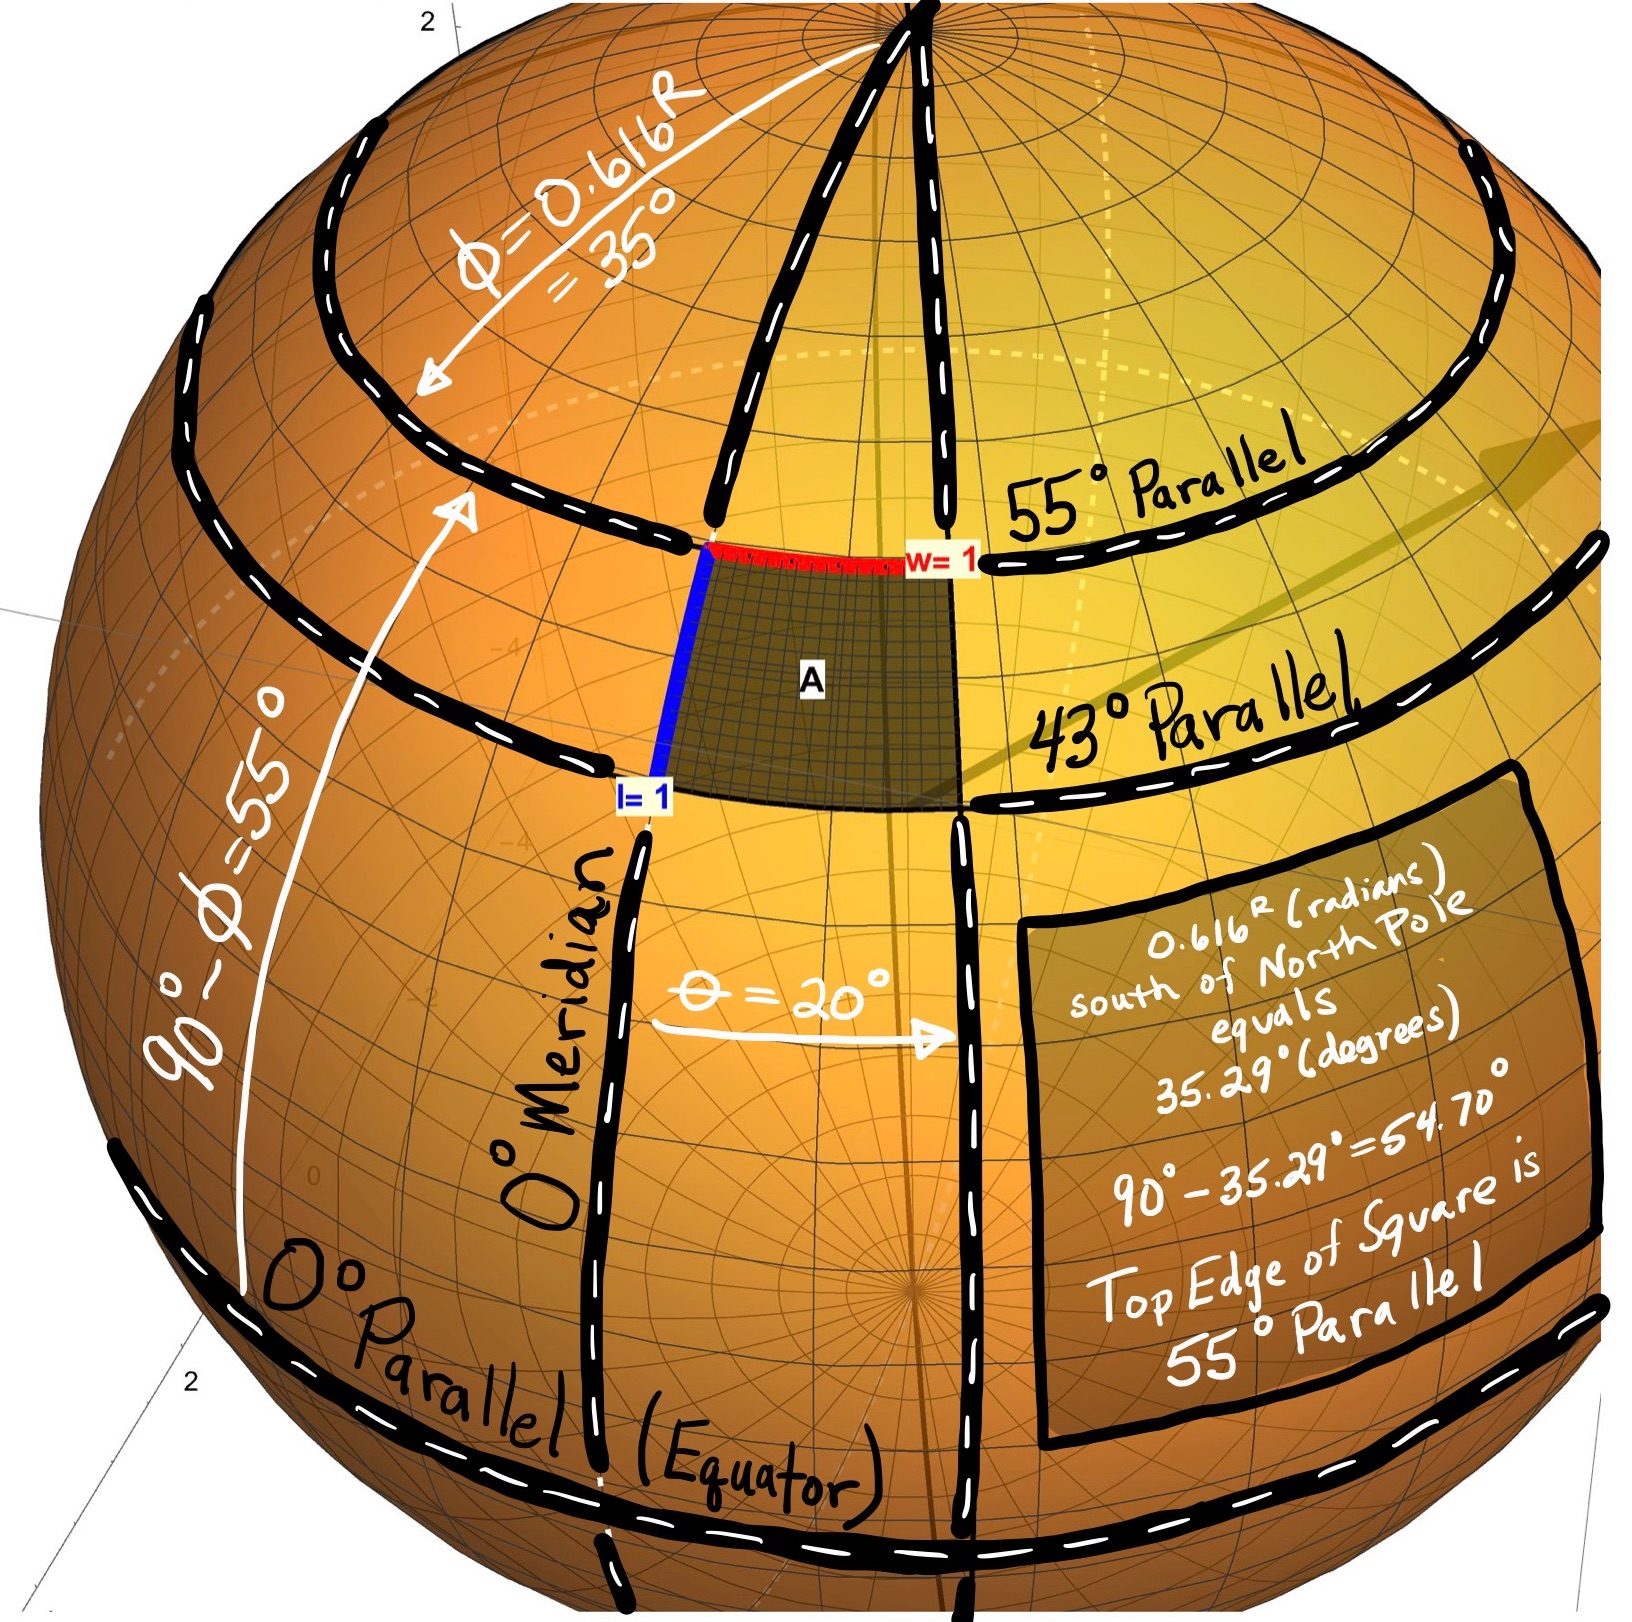 Special Curves On a Sphere: Describe the sphere parametrically as \(r(\theta,\phi)=(\rho\sin(\phi)\cos(\theta),\rho\sin(\phi)\sin(\theta),\rho\cos(\phi))\) with \(\theta\) the Longitude angle (measured from the Prime Meridian) and \(\phi\) the Latitude angle (measured from the North Pole). The Meridians are the circles of constant Longitude \(\theta=k\) given by \(r(\phi)=(\rho\sin(\phi)\cos(k),\rho\sin(\phi)\sin(k),\rho\cos(\phi))\). The Parallels are the circles of constant Latitude \(\phi=c\) given by \(r(\theta)=(\rho\sin(c)\cos(\theta),\rho\sin(c)\sin(\theta),\rho\cos(c)).\) A Special Parallel is the Equator (\(\phi=c=\pi/2\)) given by \(r(\theta)=(\rho\cos(\theta),\rho\sin(\theta),0)\). A Special Meridian is the Prime Meridian (\(\theta=k=0\)) given by \(r(\phi)=(\rho\sin(\phi),0,\rho\cos(\phi))\).